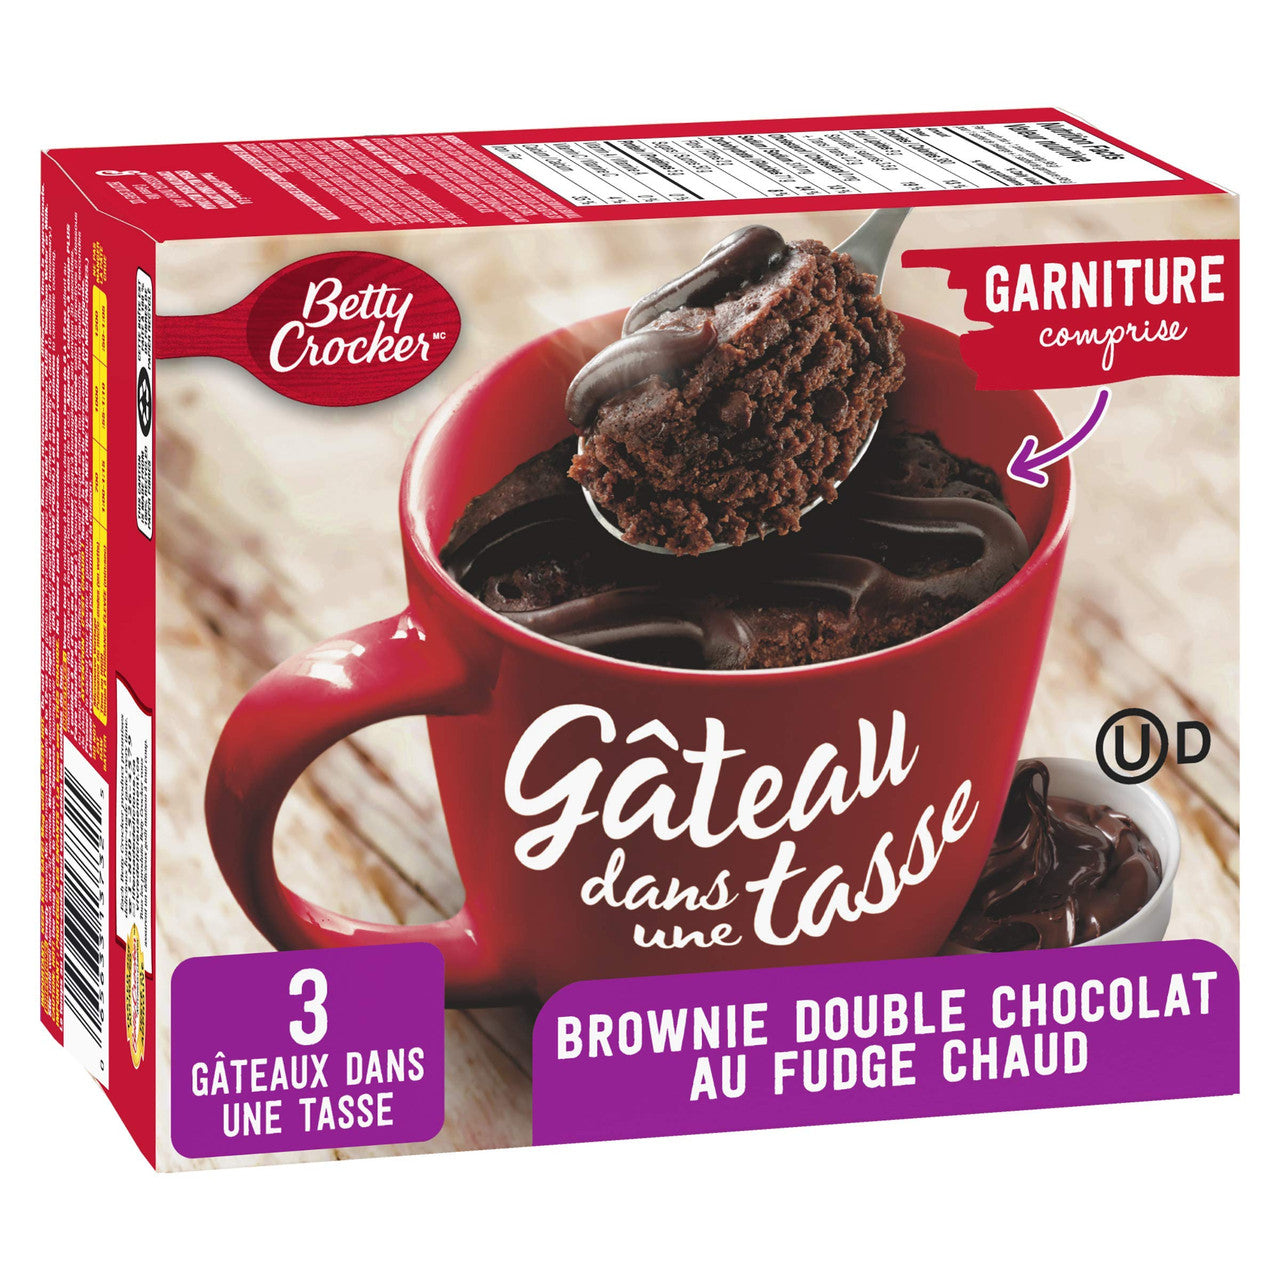 Betty Crocker Mug Cake Hot Fudge Double Chocolate Brownie With Fudge Topping, 294g/10.4 oz., {Imported from Canada}